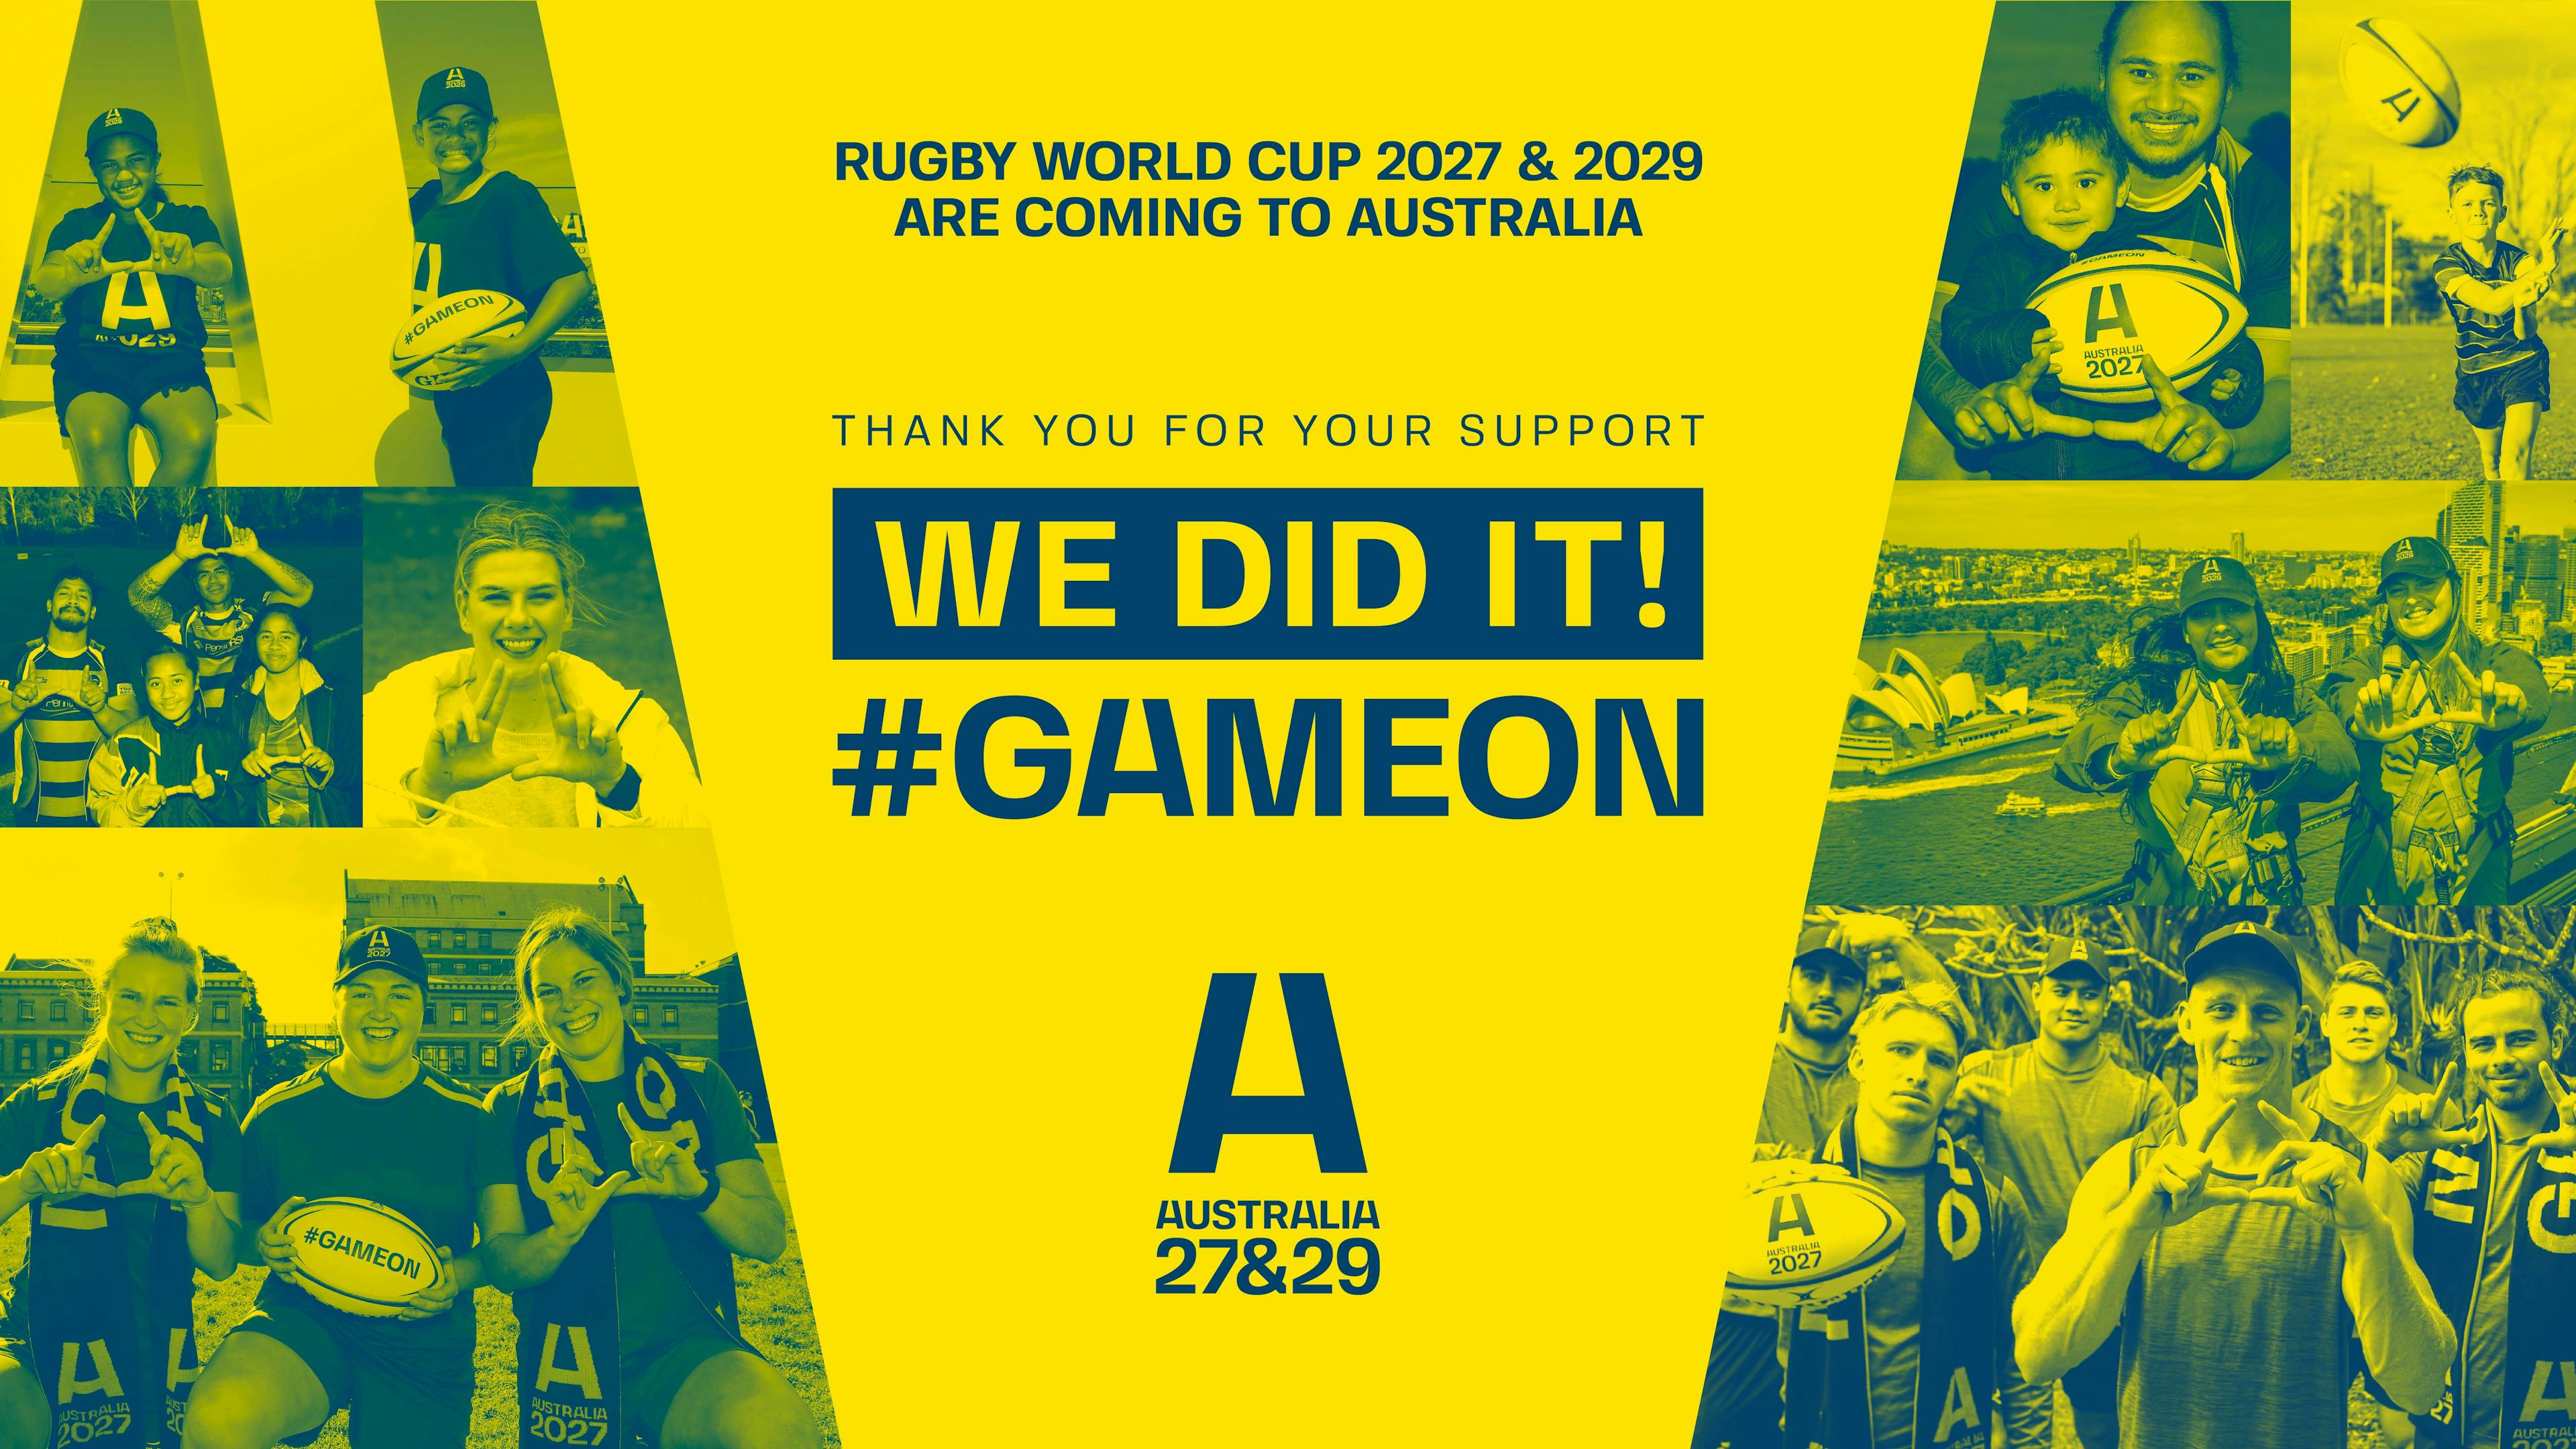 Rugby World Cup 2027 & 2029 are coming to Australia